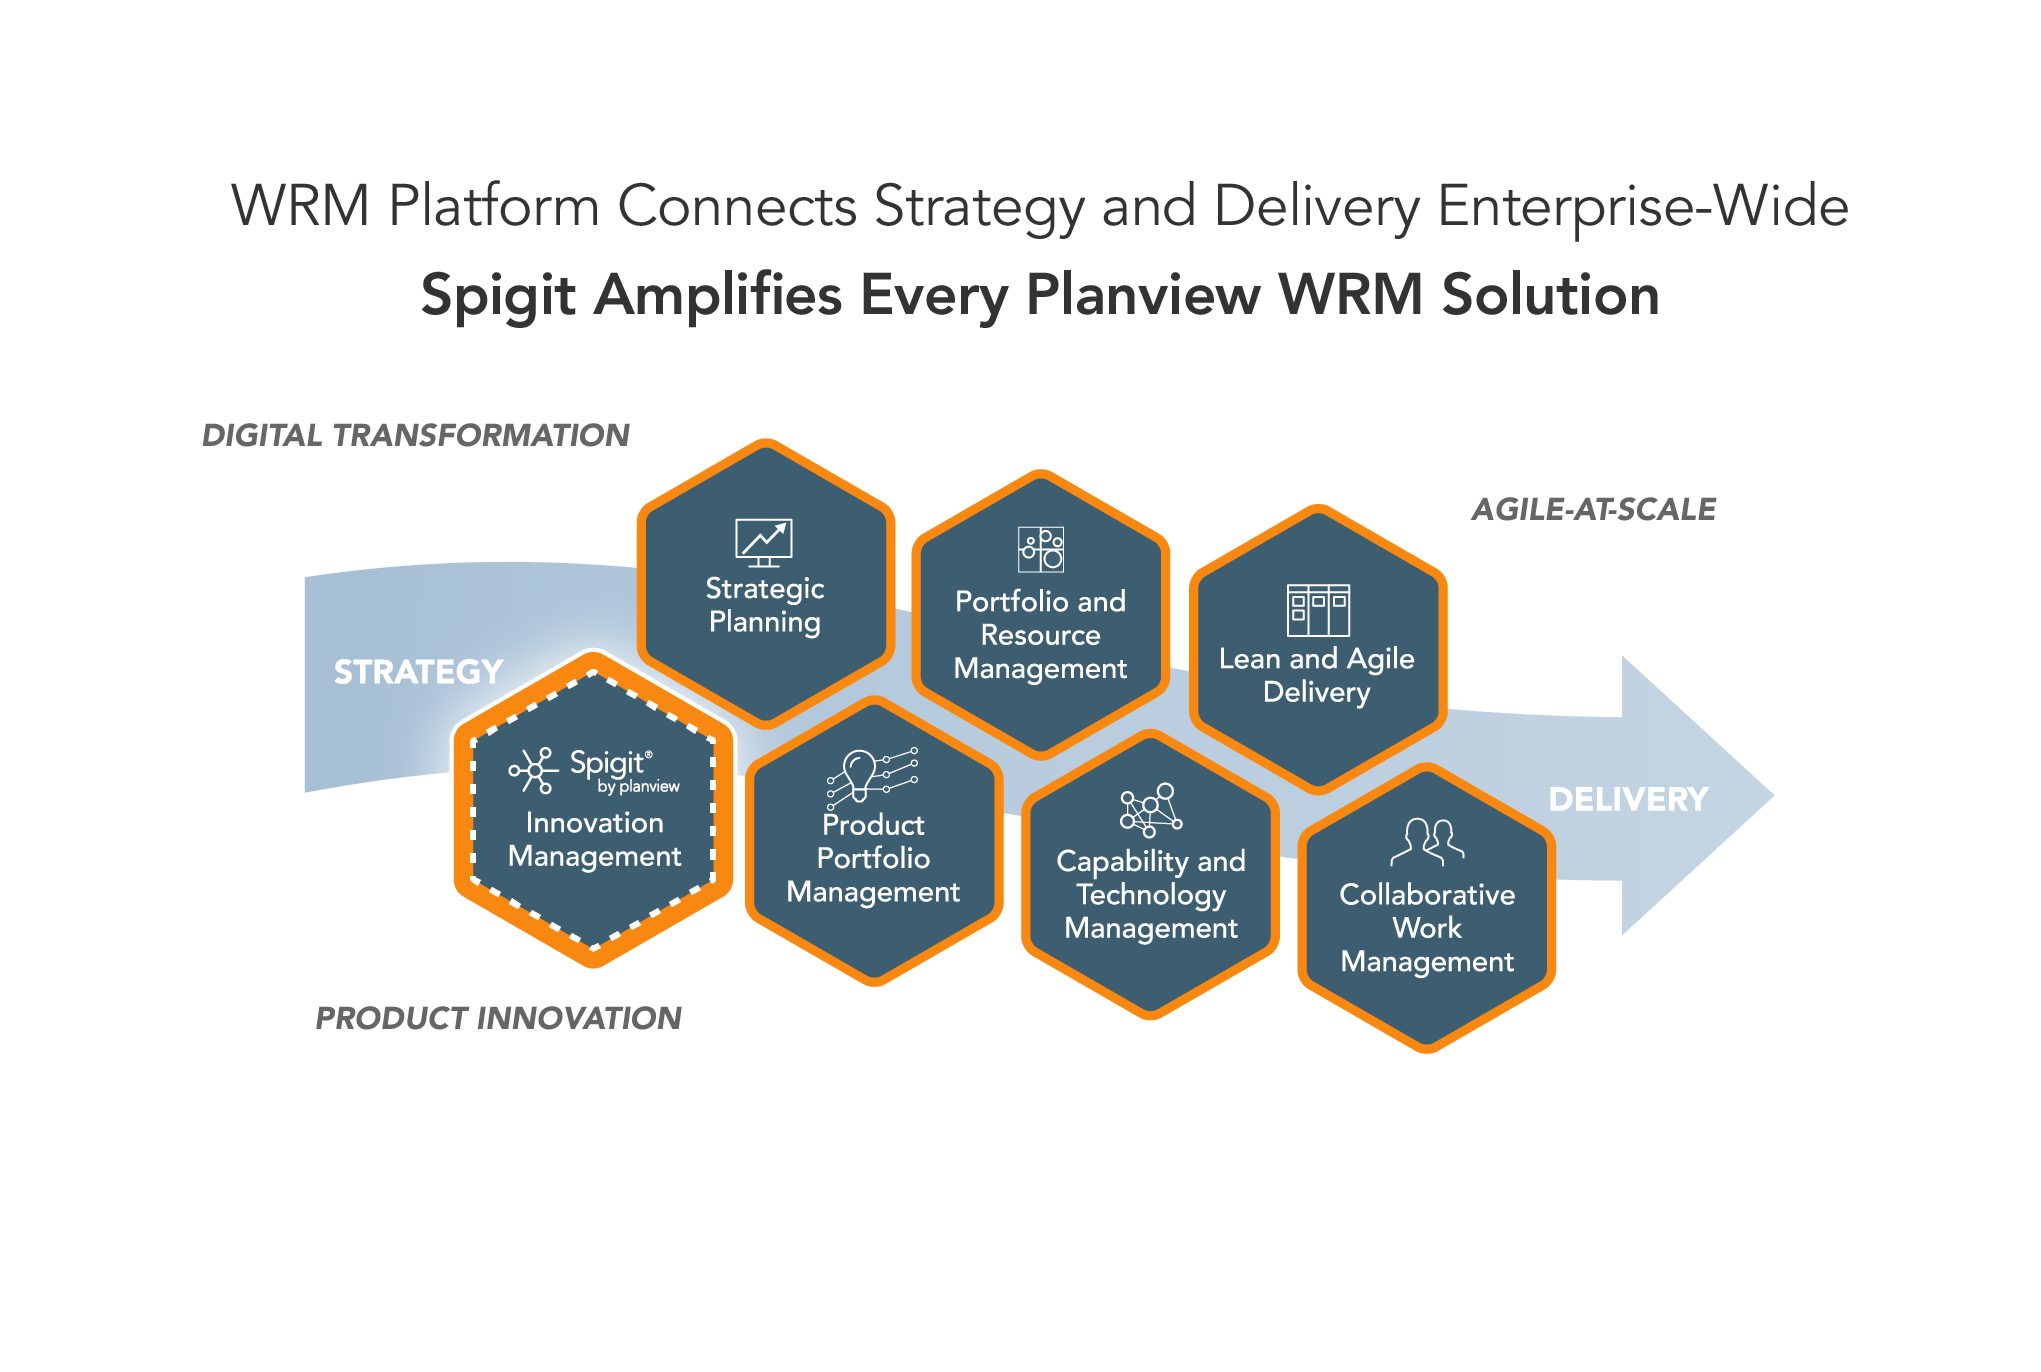 Planview IdeaPlace Amplifies Every Planview WRM Solution